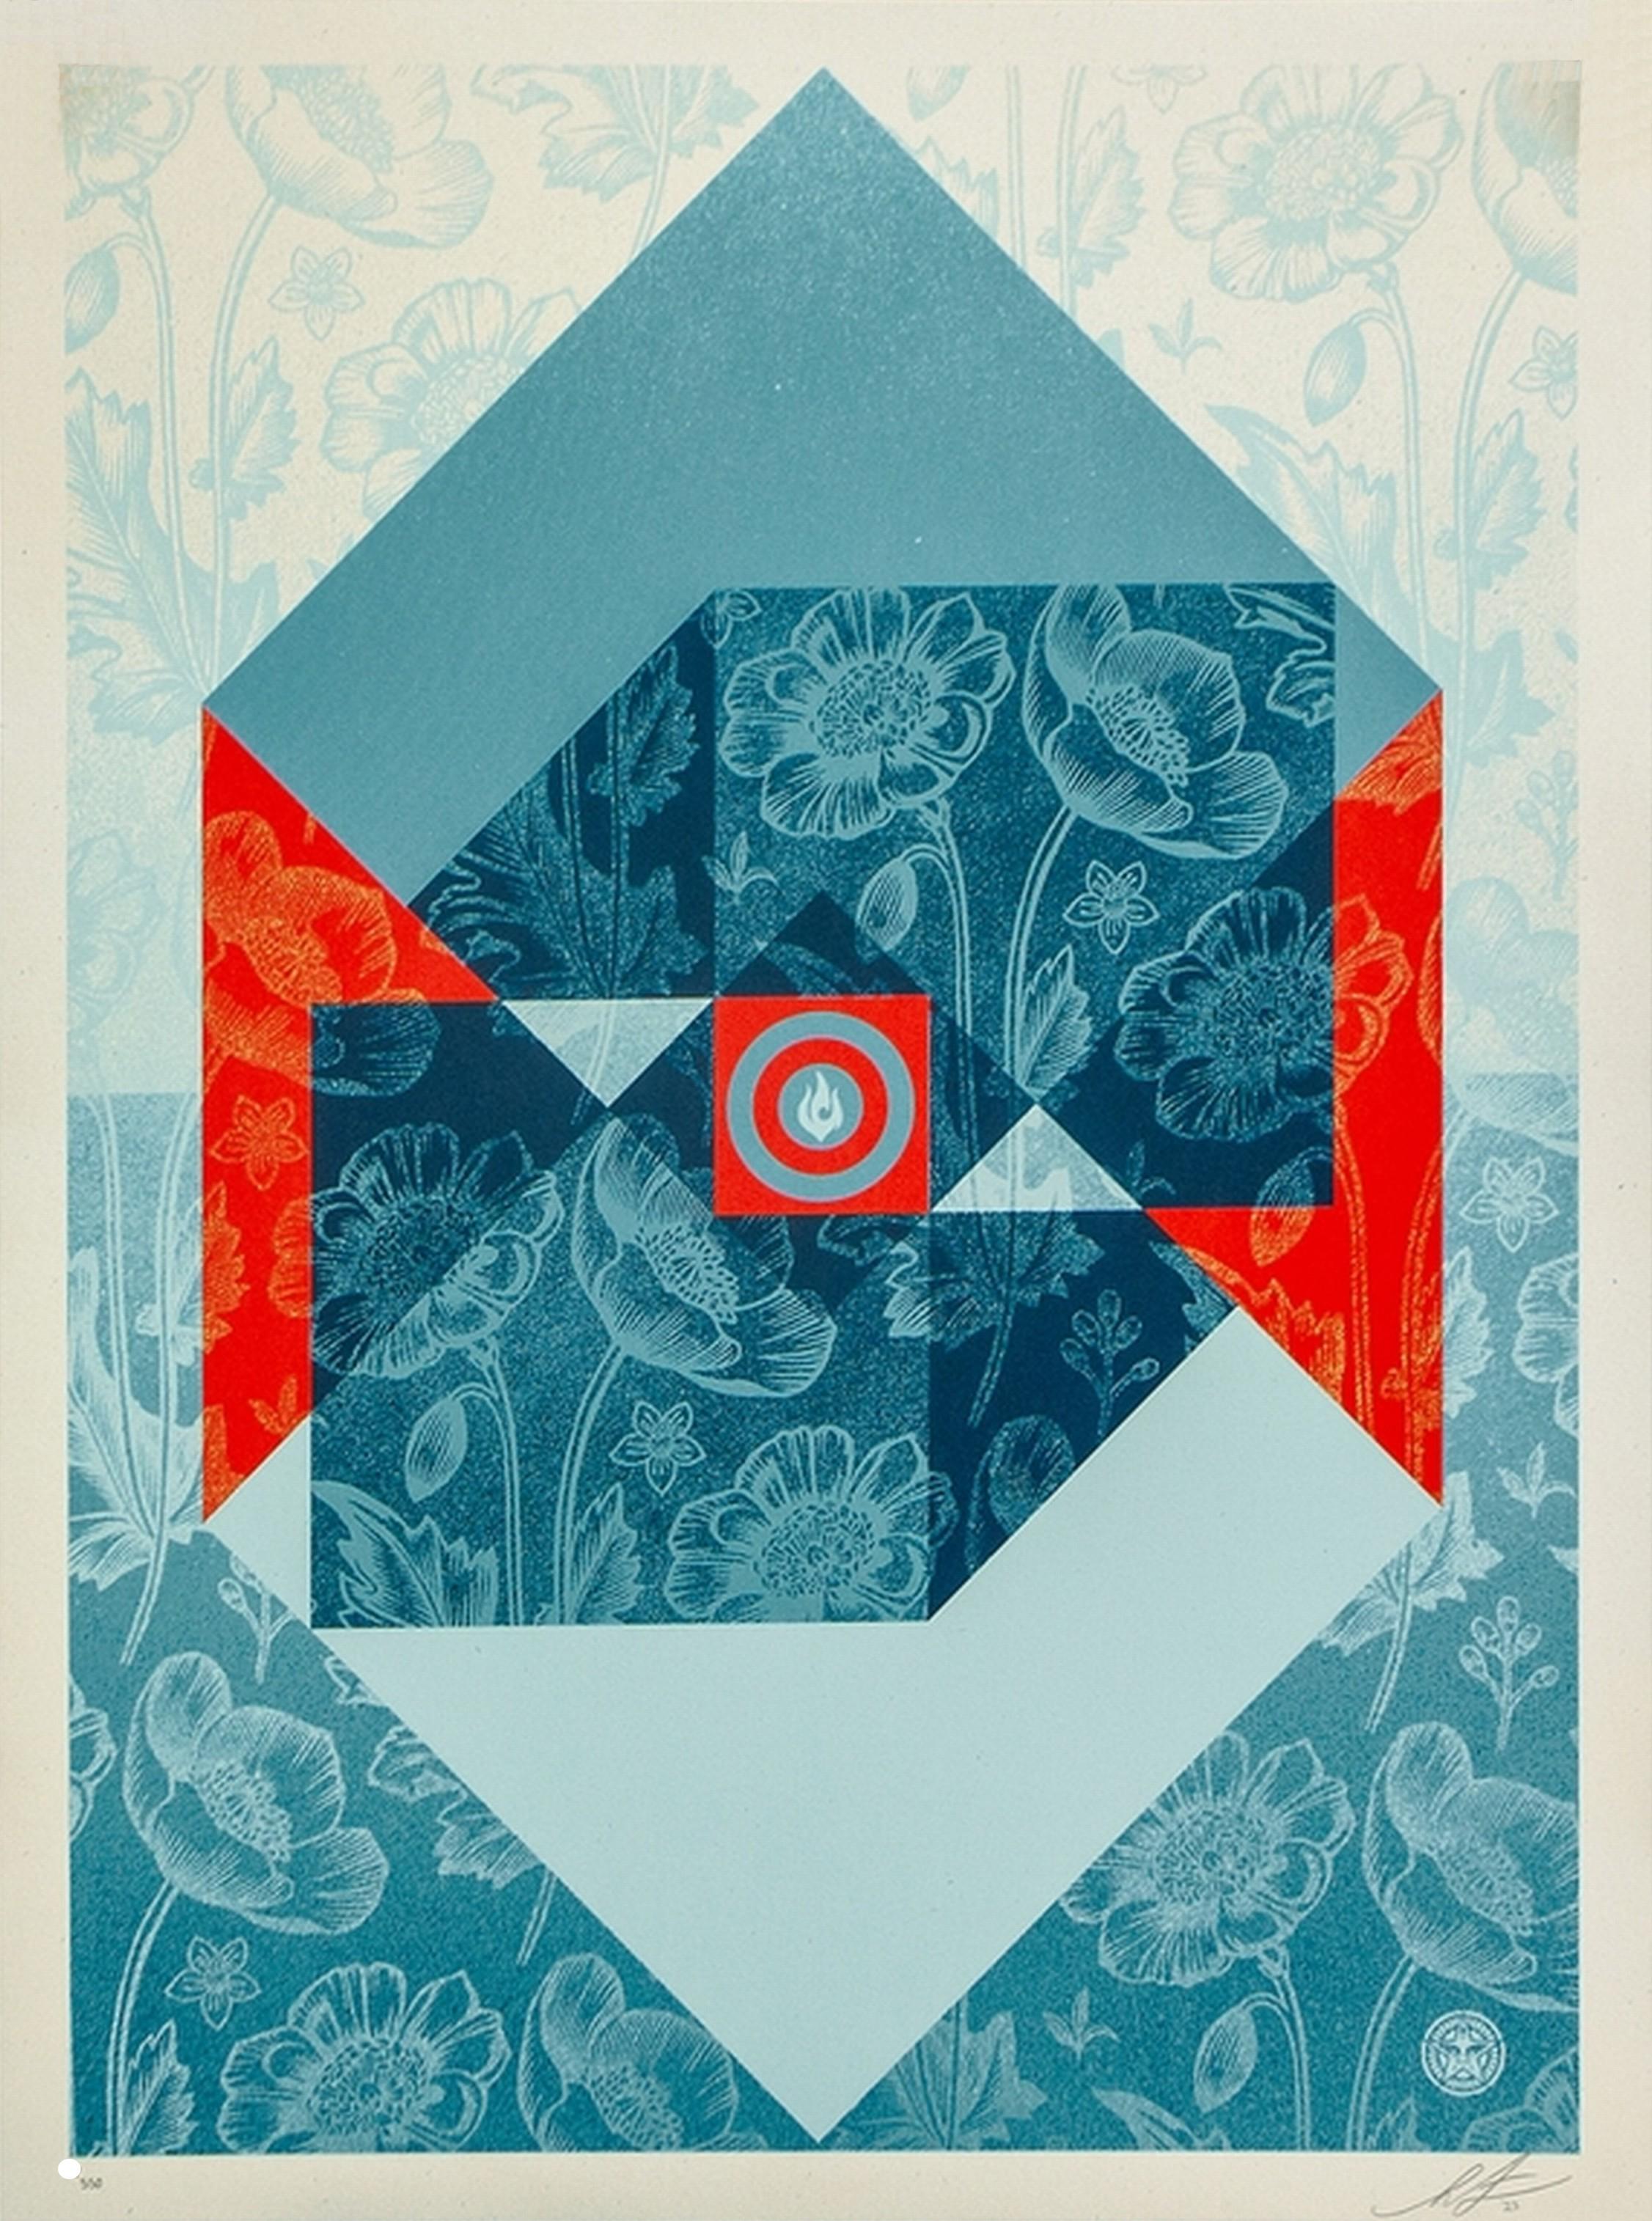 The Angles of Sedation and Destruction (Ethereal, Gradients, Spray Paint) - Print by Shepard Fairey